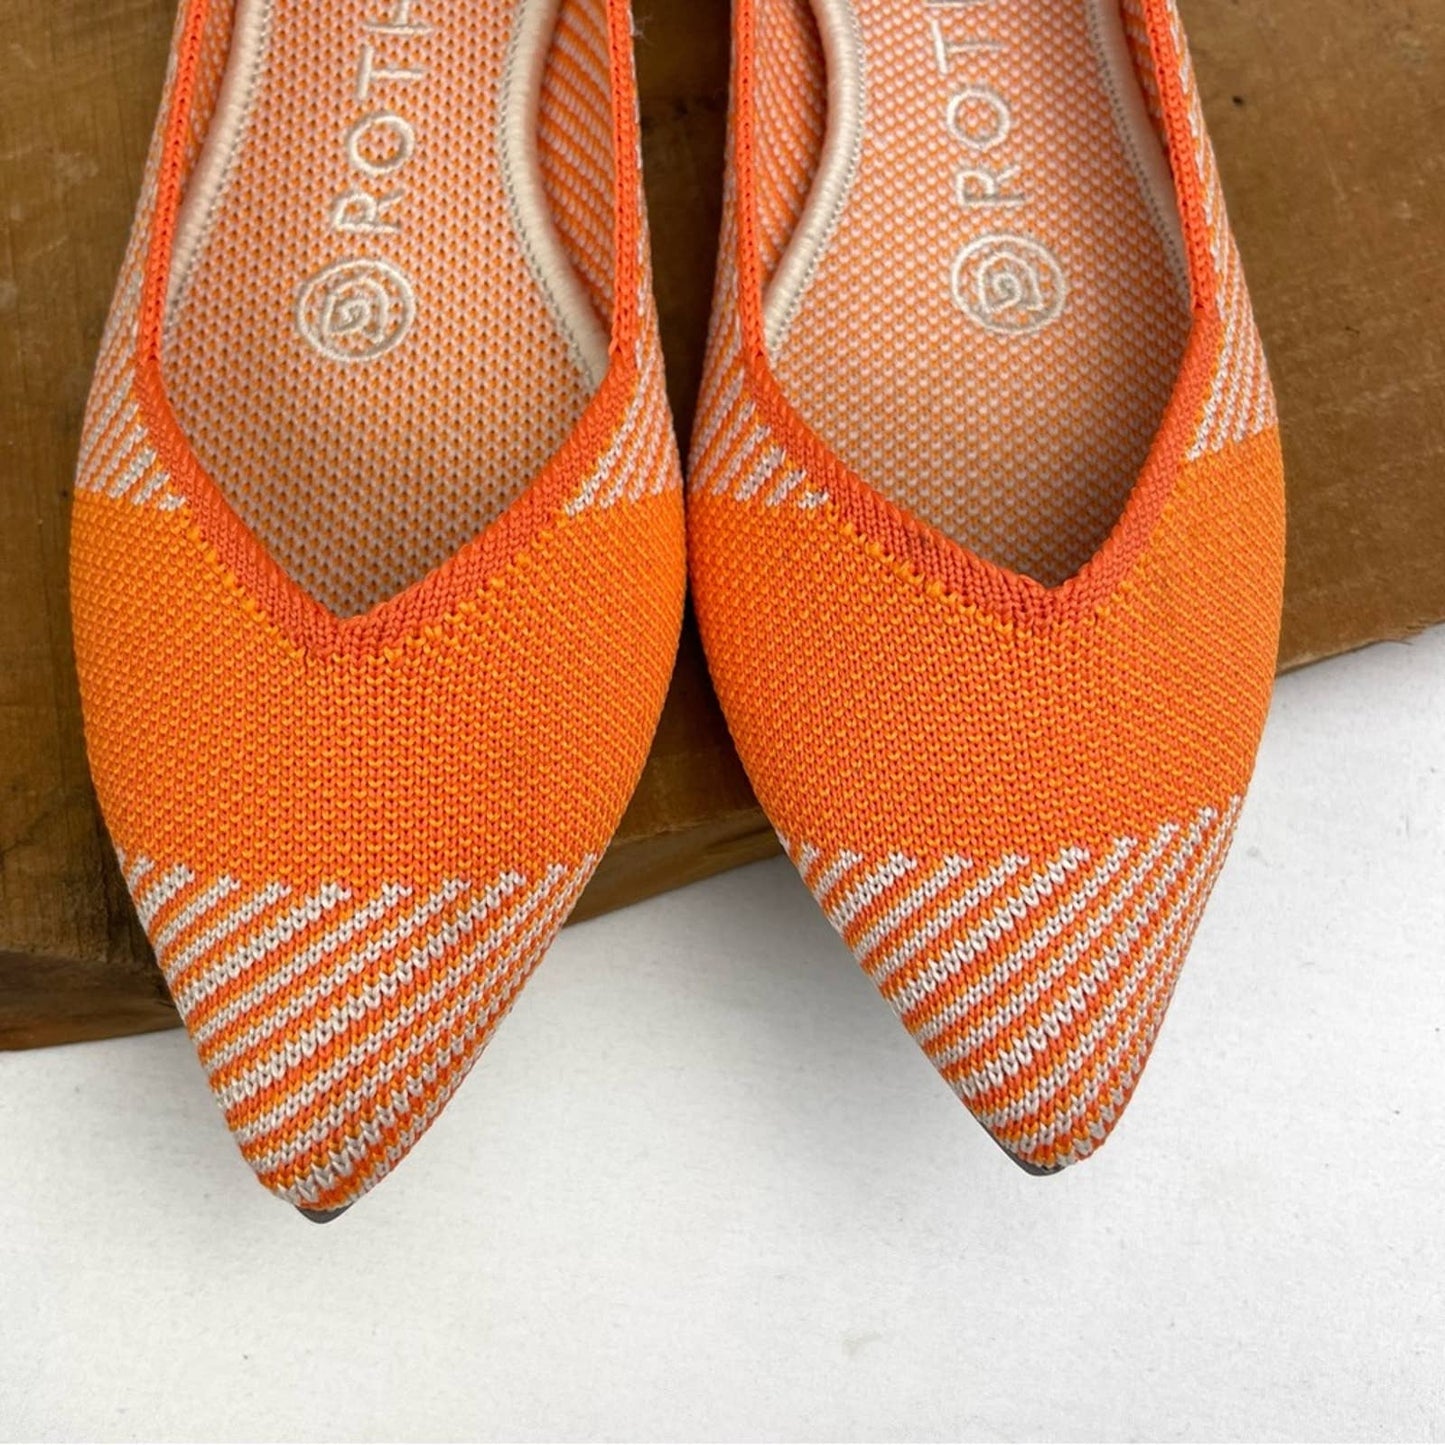 Rothy’s The Point Sherbet Orange White Striped Flats Bright Casual Summer Shoes Size 5